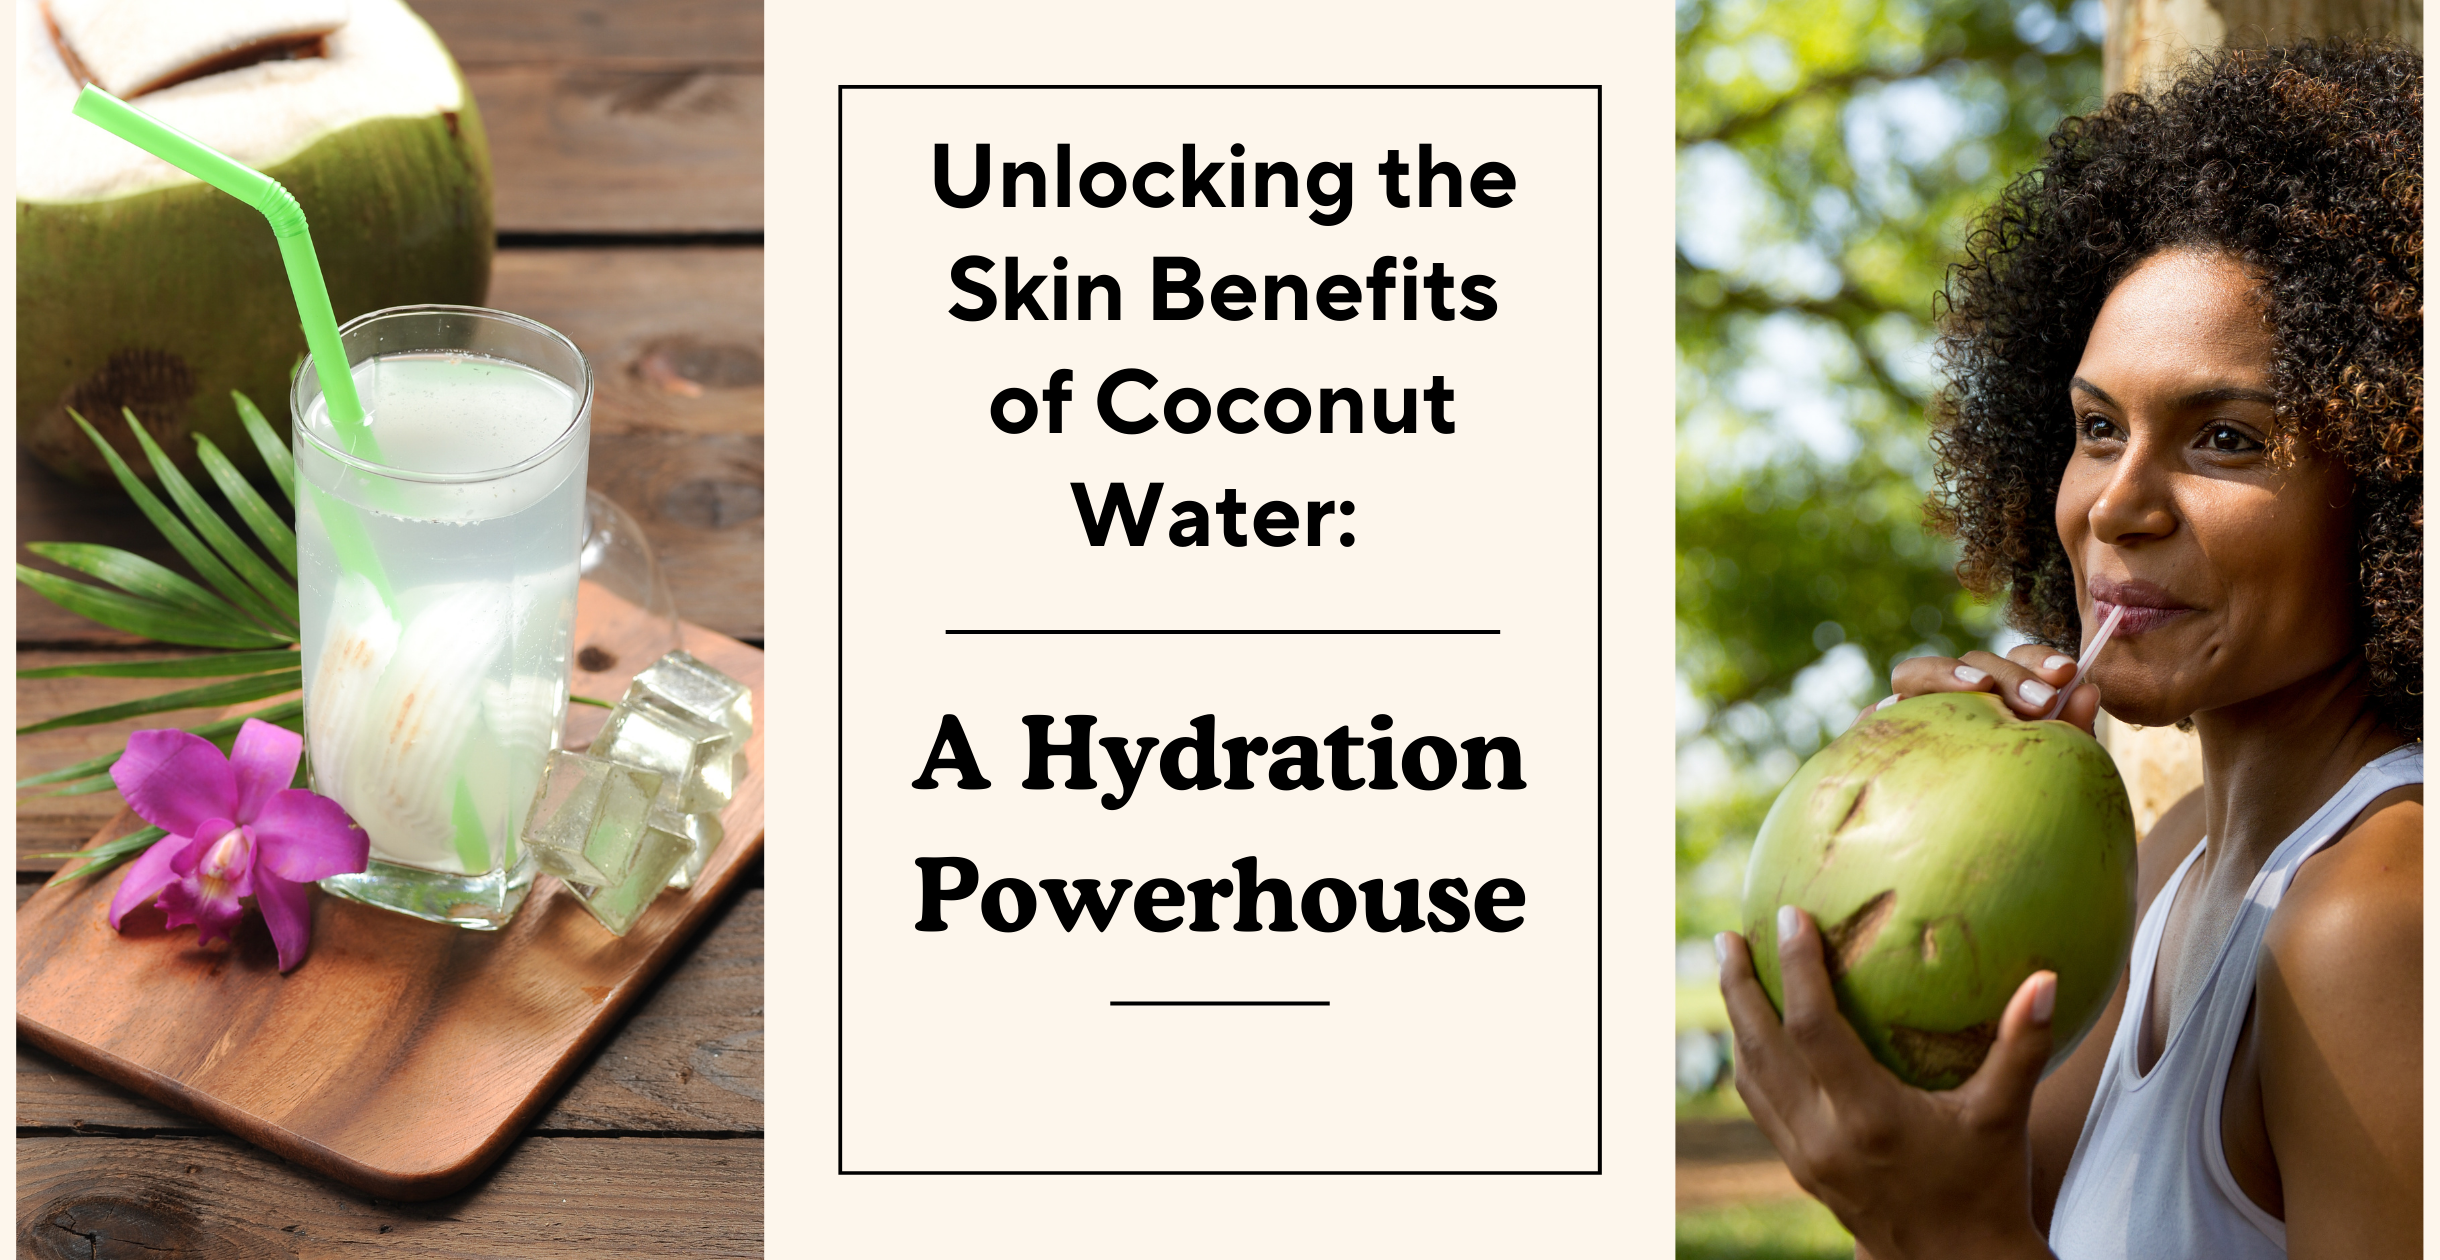 Unlocking the Skin Benefits of Coconut Water: A Hydration Powerhouse